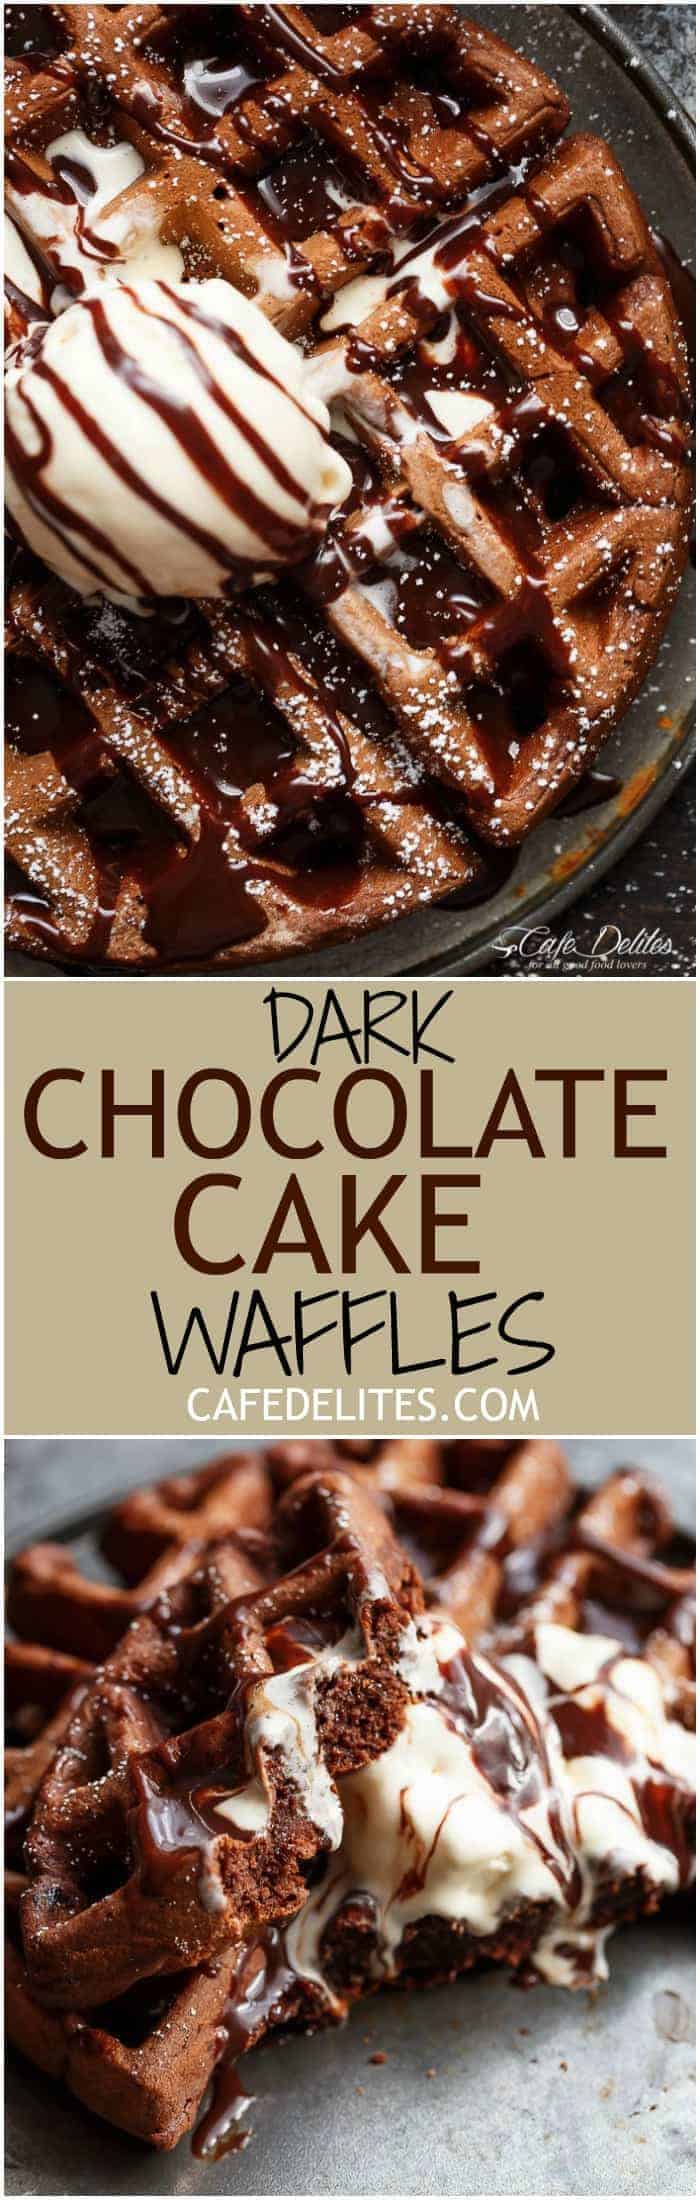 Dark Chocolate Cake Waffles are rich and decadent, chocolate cake transformed into waffles! Perfect for breakfast or dessert with no complicated steps! | https://cafedelites.com